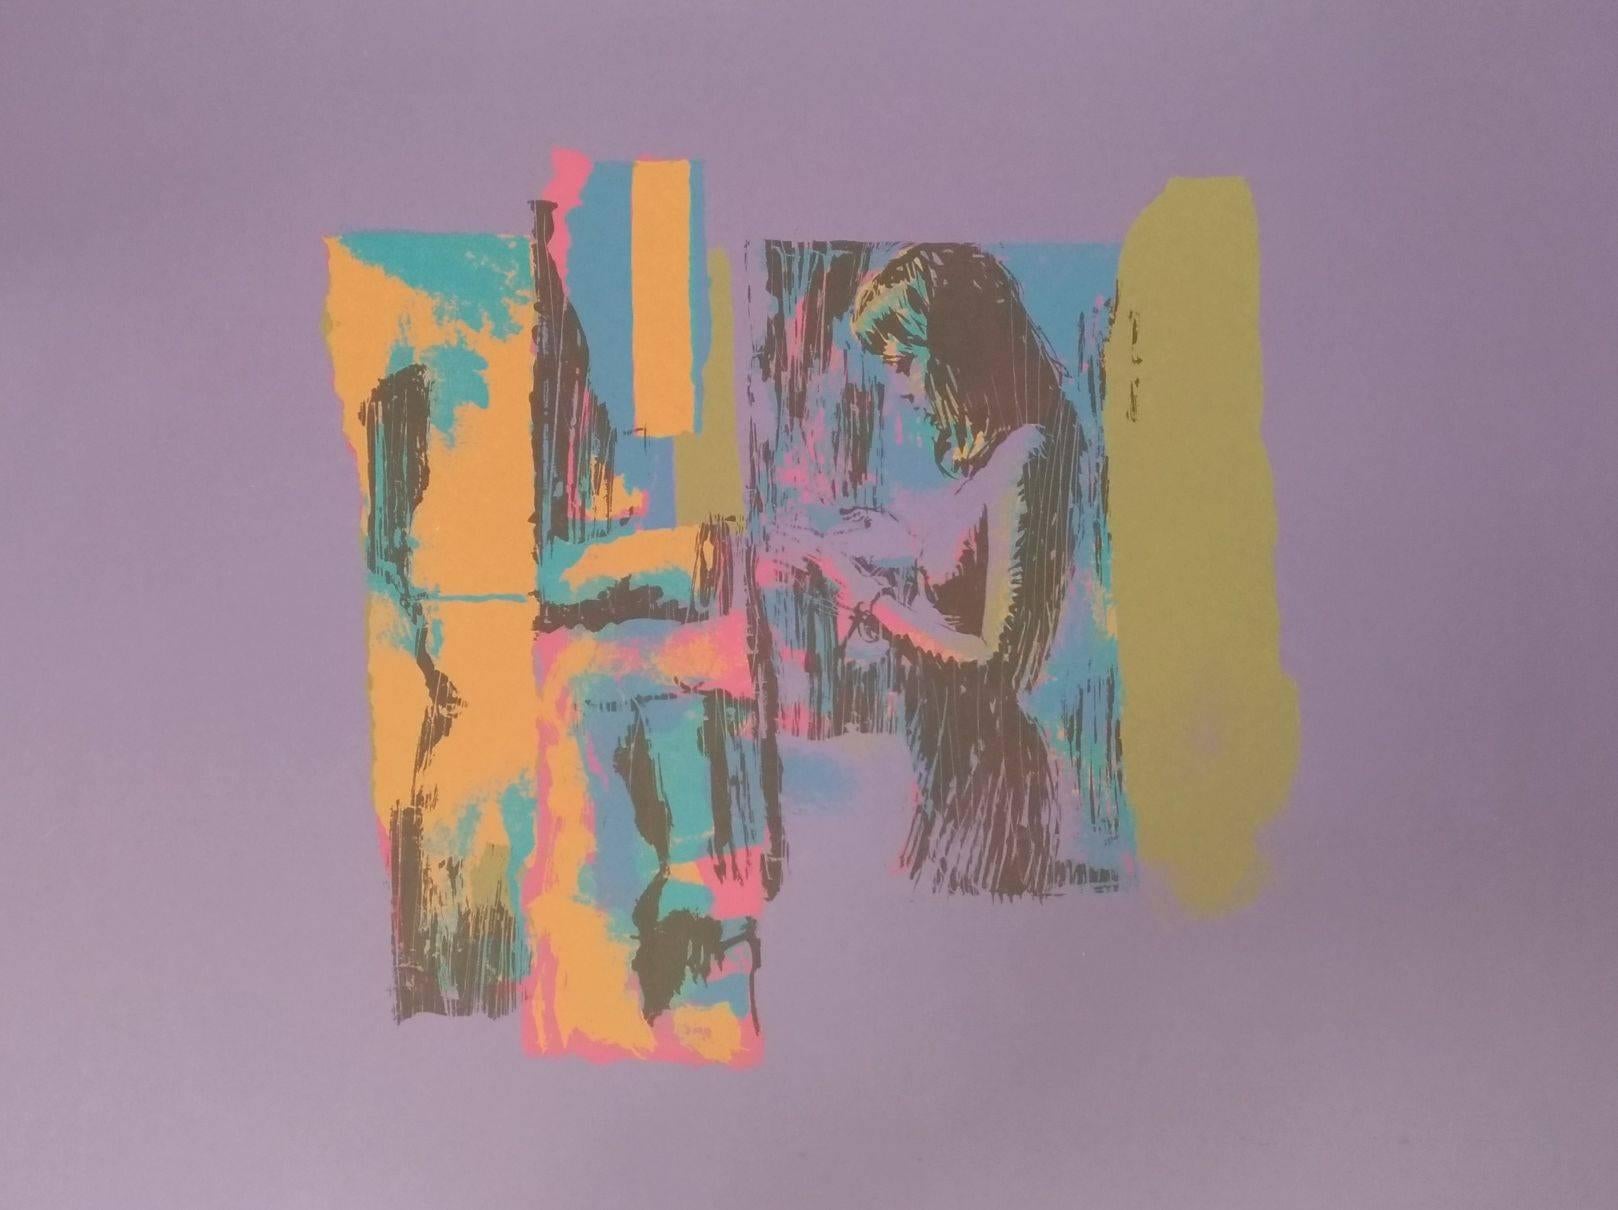 Woman in Yellow is an original serigraph realized by Nicola Simbari in 1976.
The artwork represents a female nude in profile with an abstract multicolour composition. There are colored boxes with black vertical lines and a purple background.

Nicola